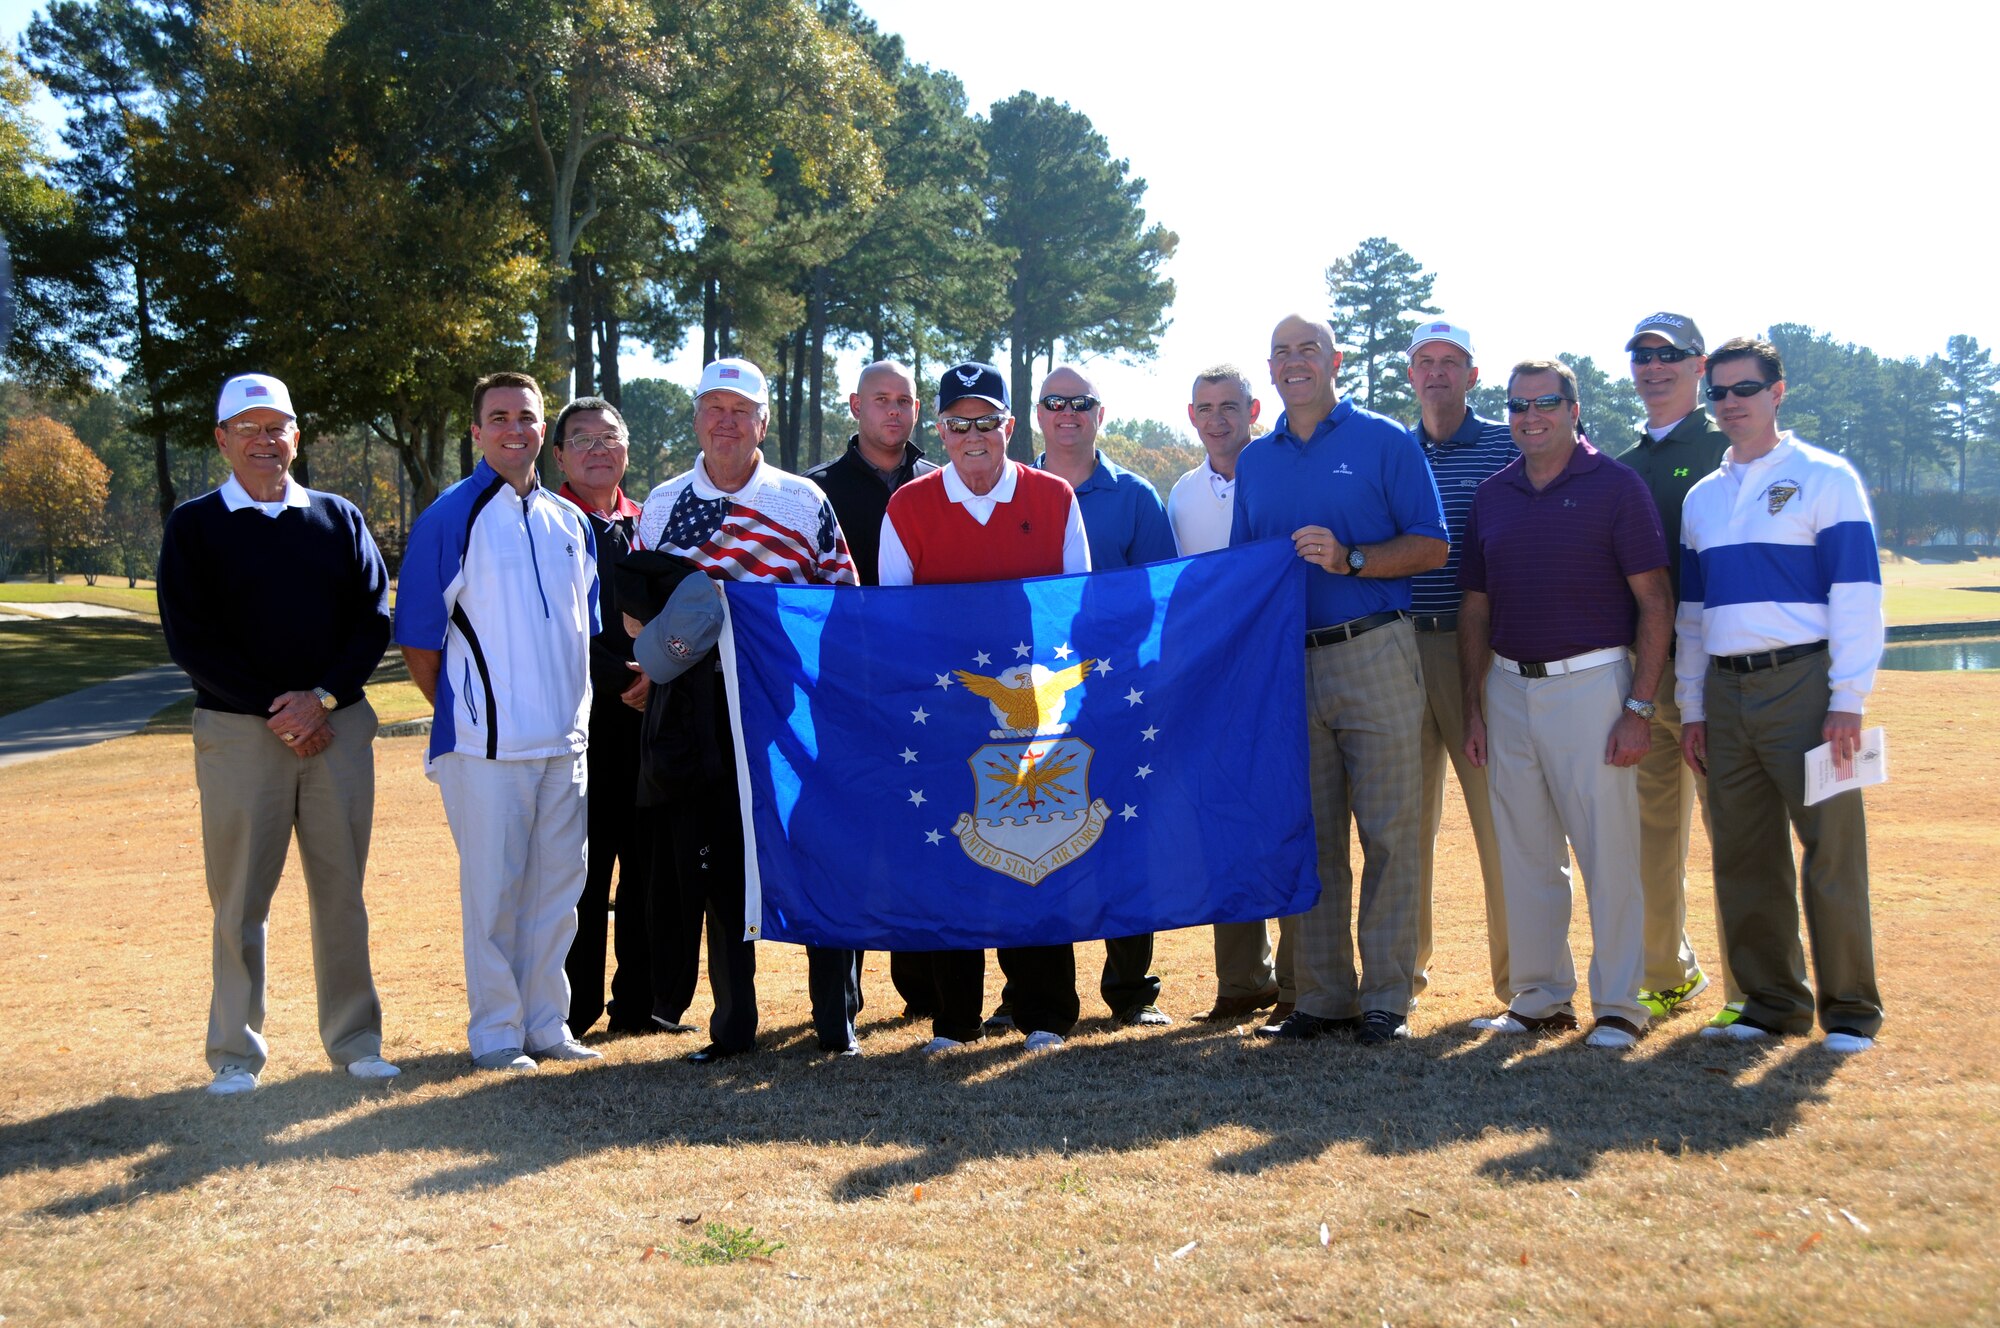 Airmen past and present pose for a photo at the Atlanta Athletic Club in John’s Creek, Ga., Nov. 10, 2014. The AAC hosted a Veteran’s Golf Tournament for club members and current servicemembers on their Riverside course, ranked as one of the top private courses by Golf Digest. (U.S. Air Force photo by Senior Airman Daniel Phelps/Released)